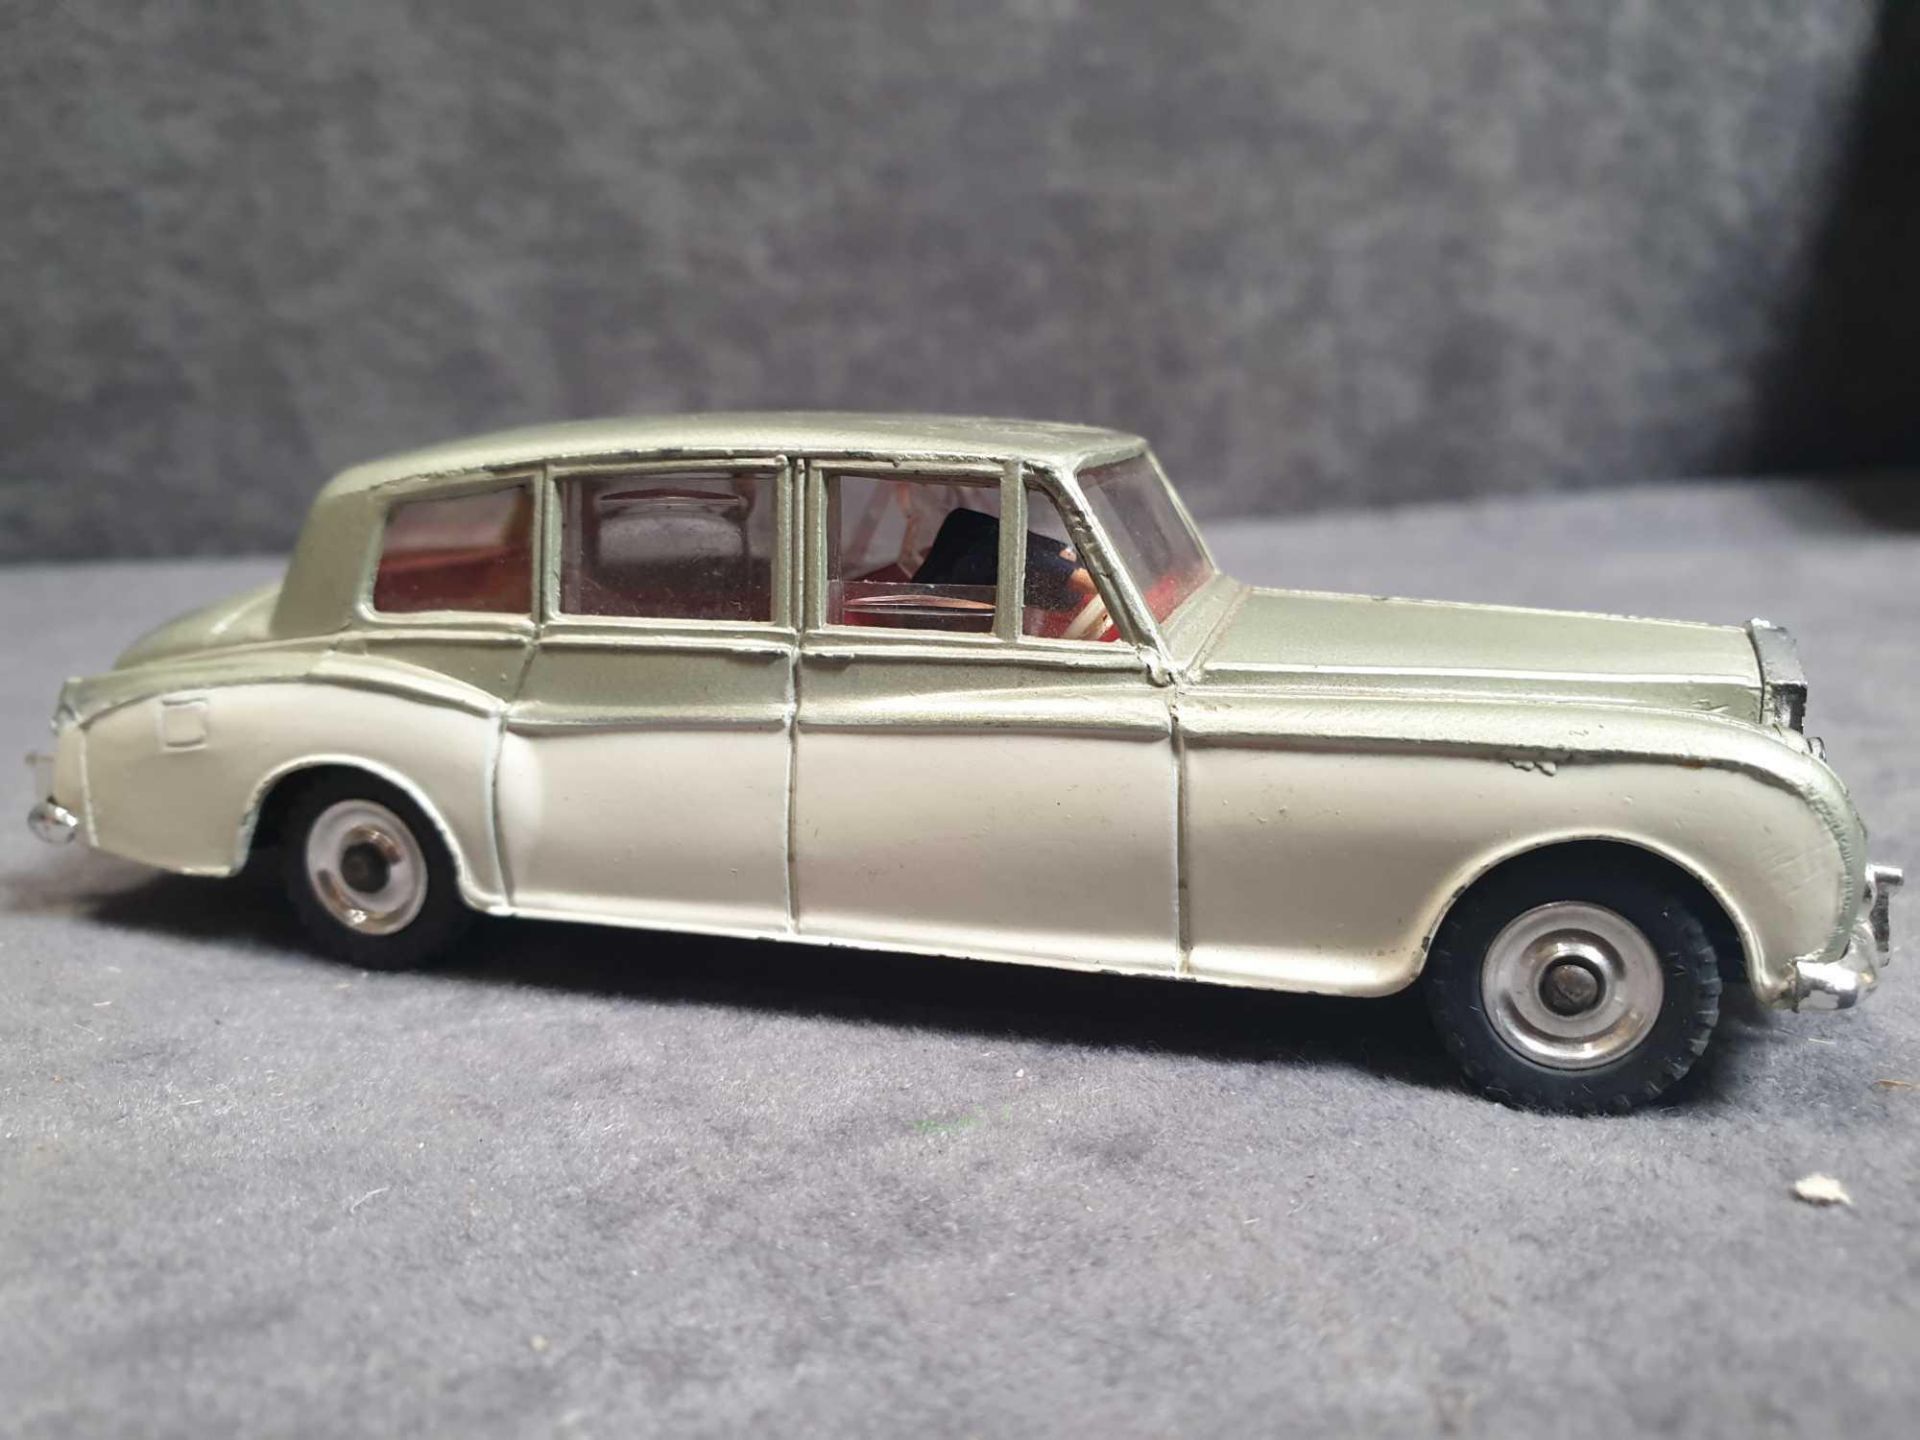 Dinky Diecast #198 Dinky Diecast Rolls Royce Phantom V Green/Cream - Concave Hubs Without Box 1962- - Image 3 of 4